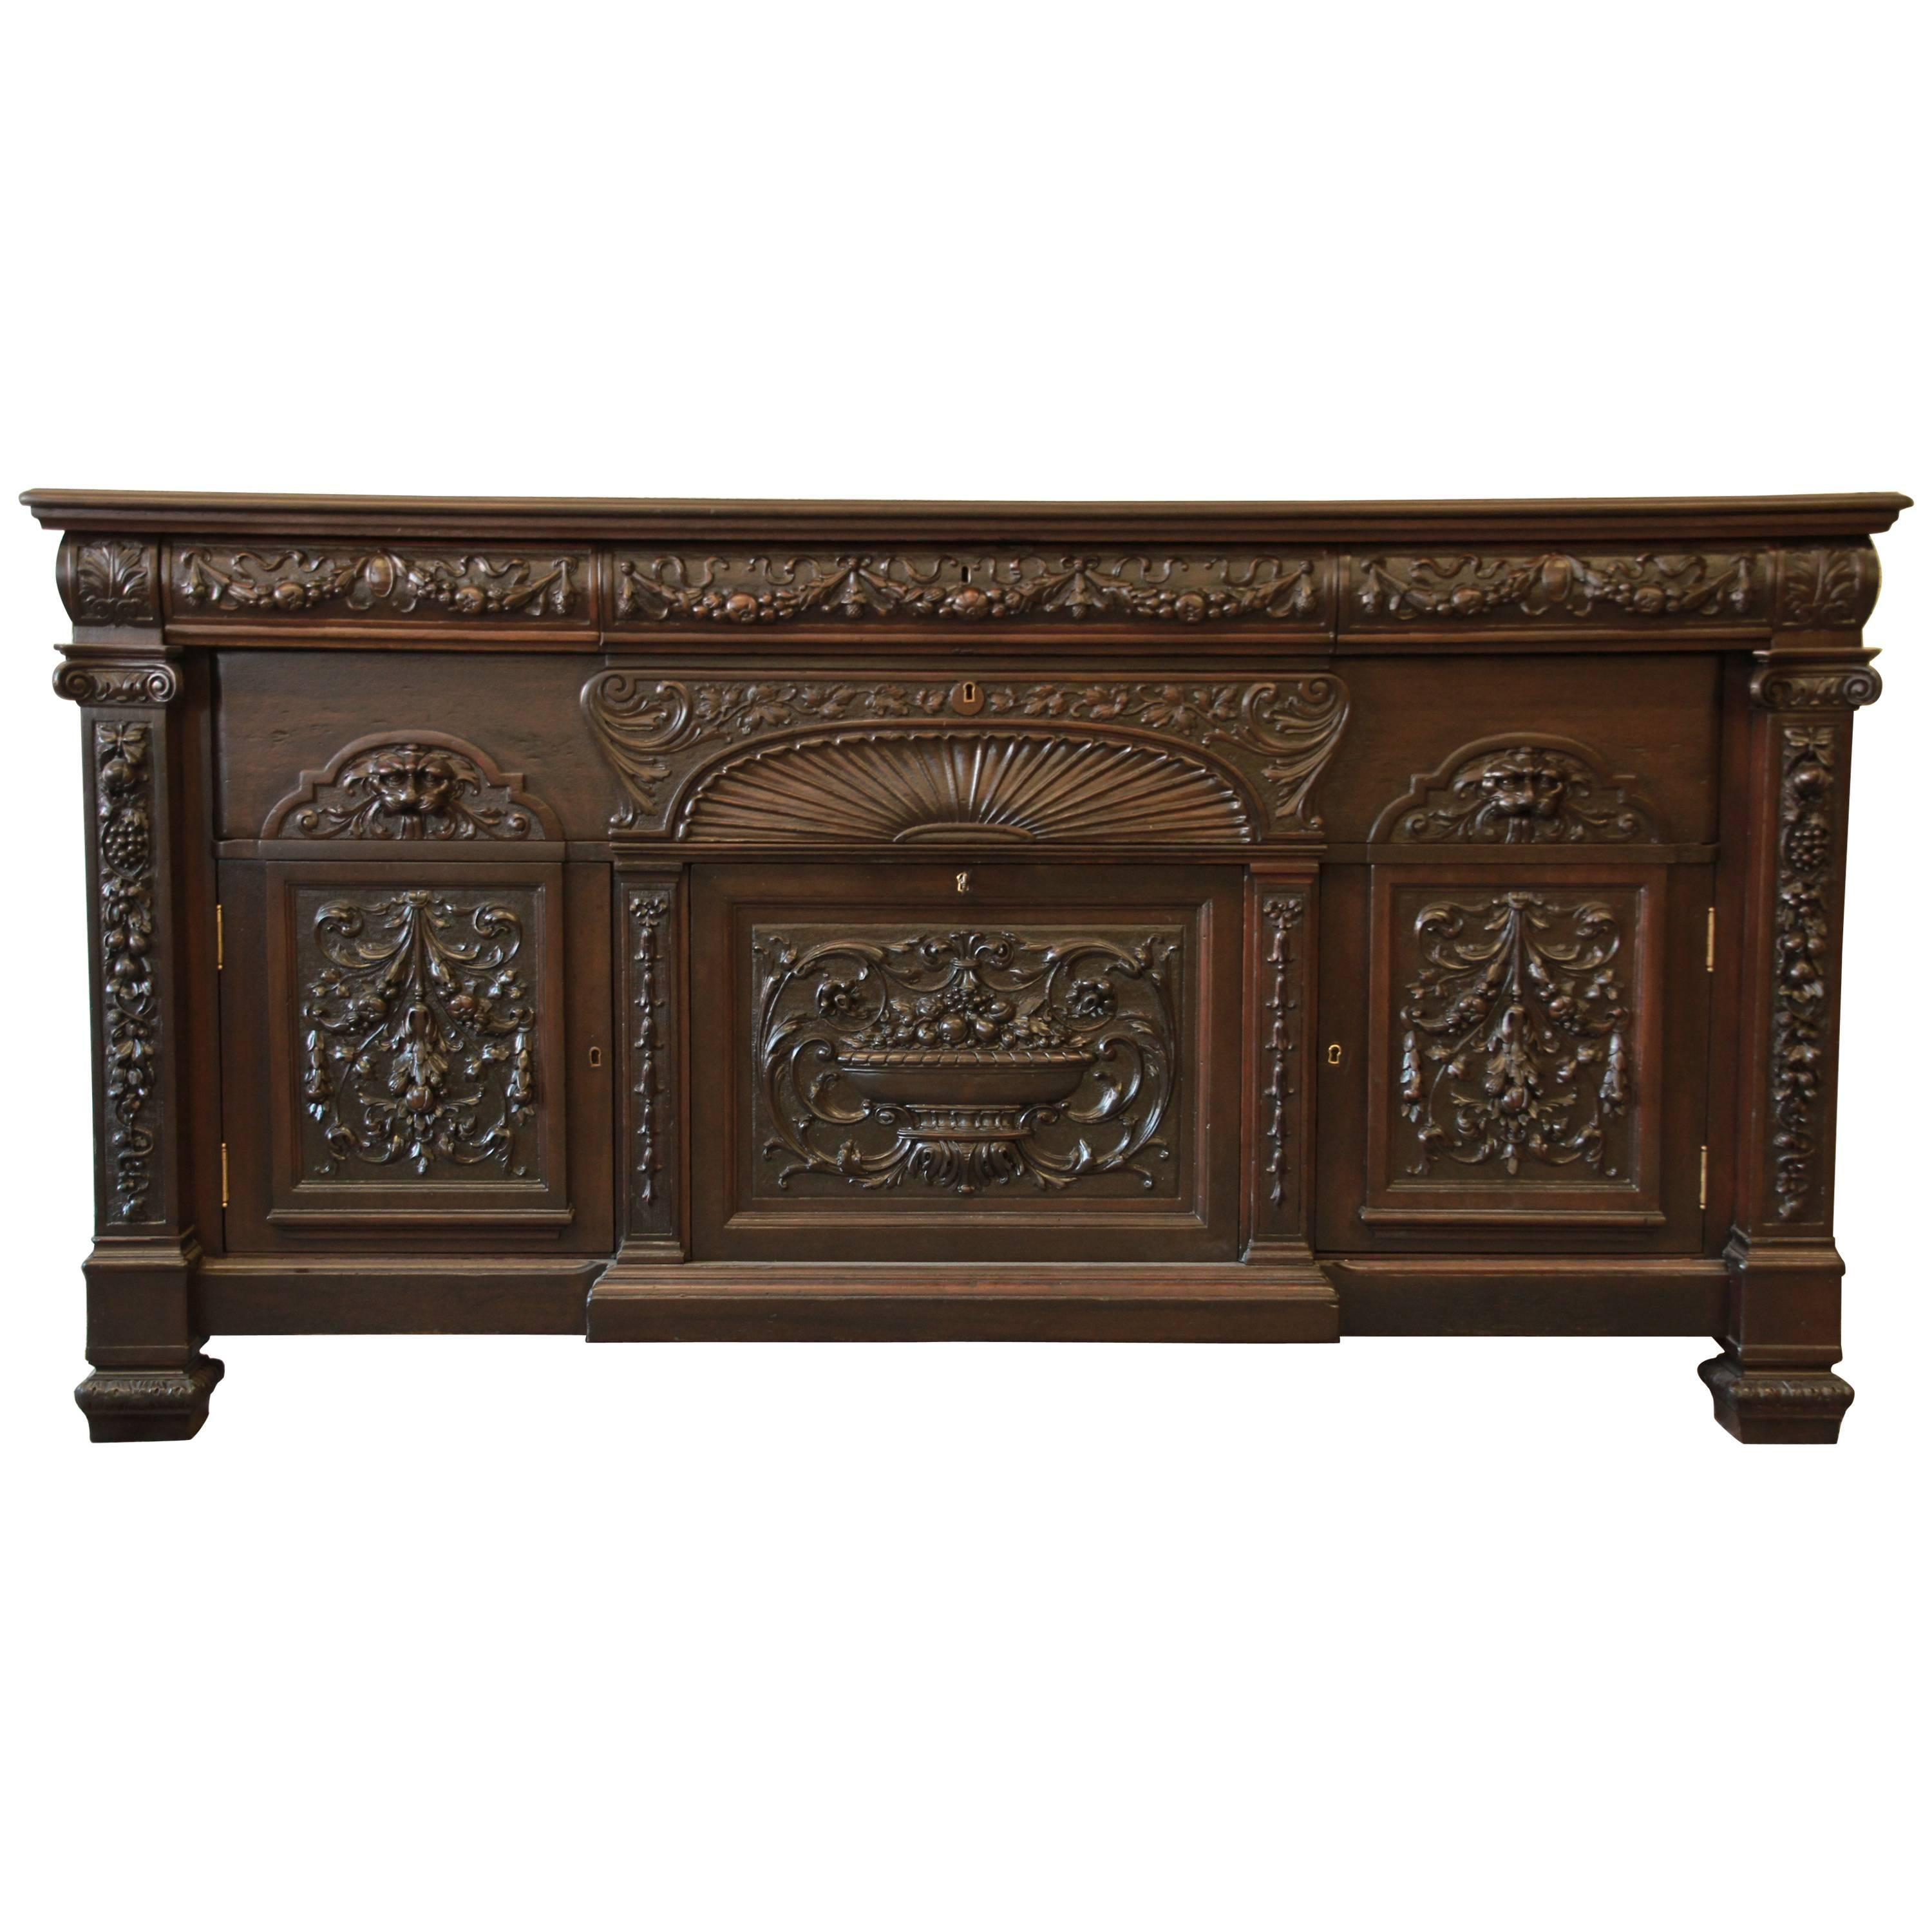 19th Century Ornate Victorian Mahogany Sideboard in the Manner of R.J. Horner